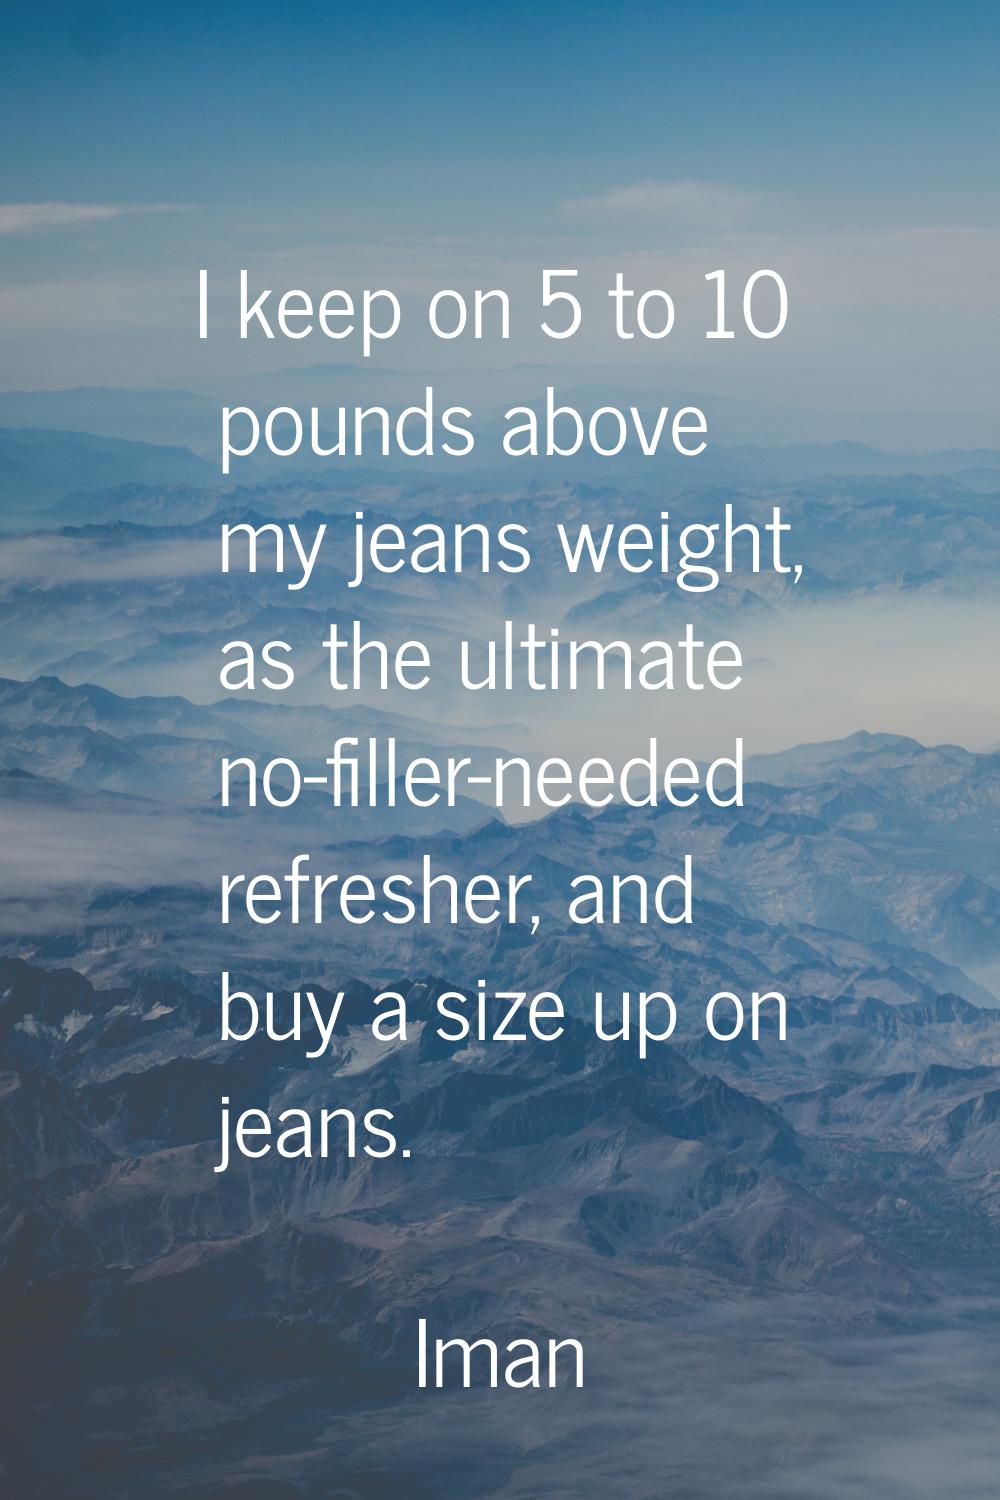 I keep on 5 to 10 pounds above my jeans weight, as the ultimate no-filler-needed refresher, and buy